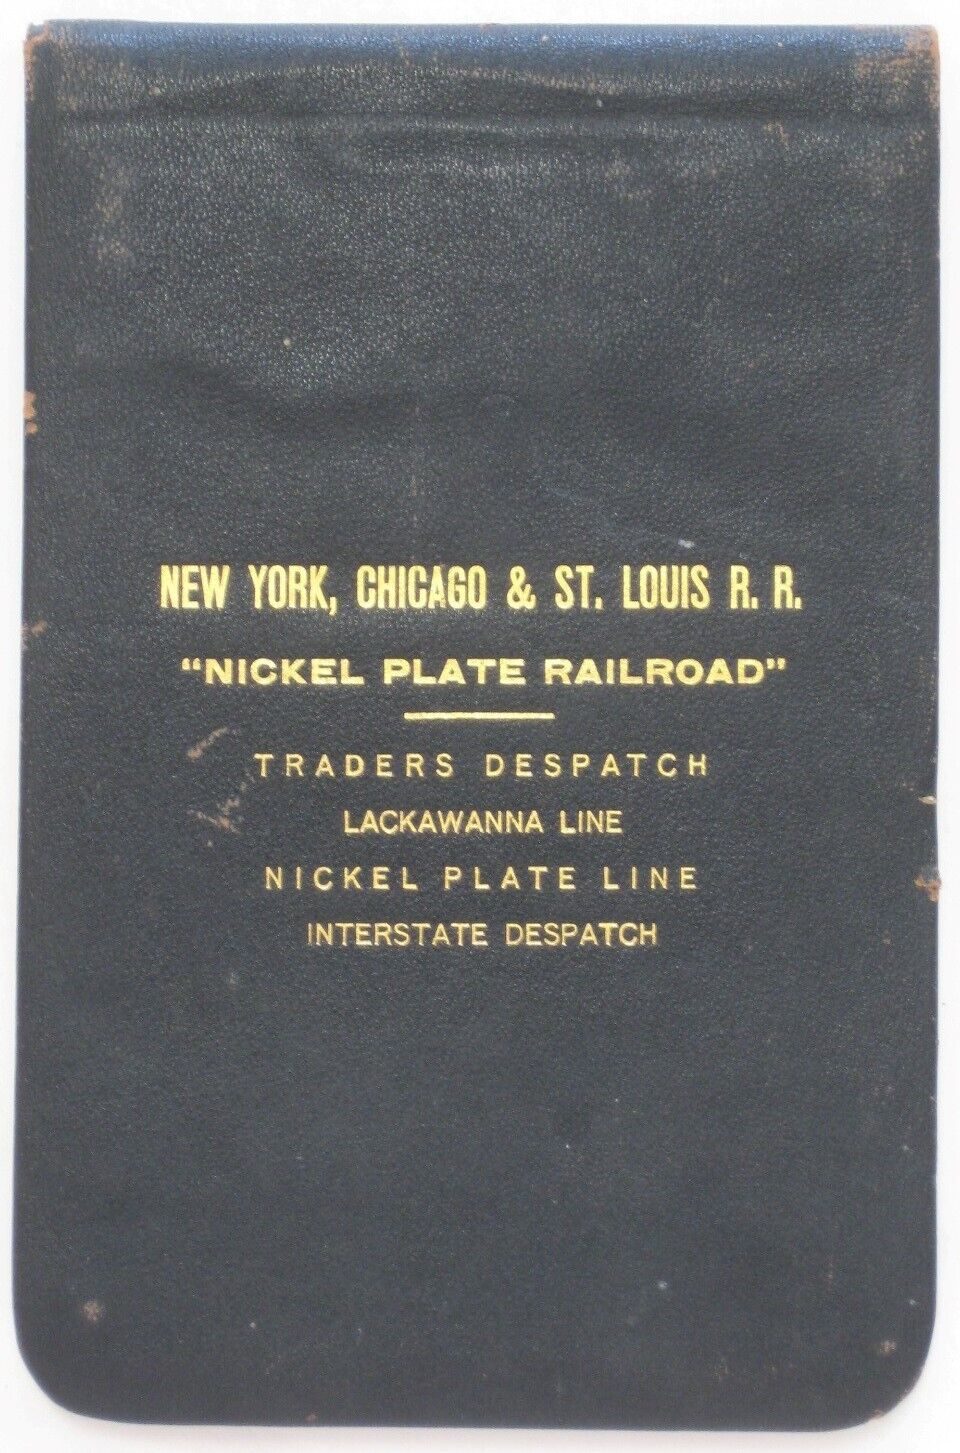 Original 1916 NICKEL PLATE RAILROAD Leather Book - Freight Rates for Grease Wool